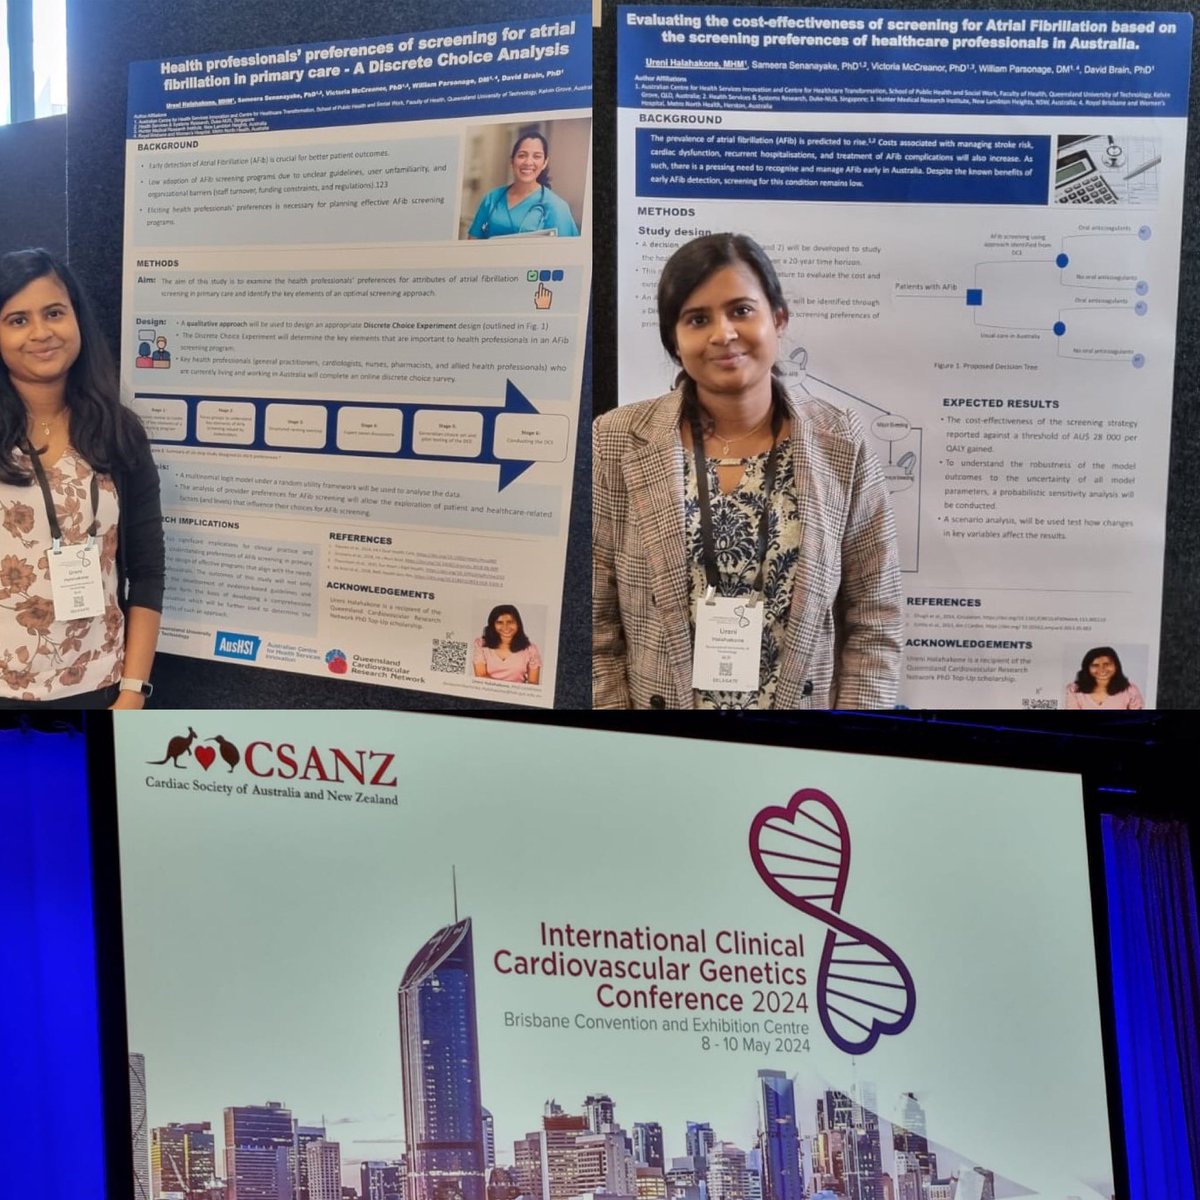 Congratulations to Ureni, a member of QCVRN and our 2023 PhD scholarship recipient, for attending the International Clinical Cardiovascular Genetics Conference last week and presenting 2 posters! @LastCardiology @QUT @thecsanz @OzCvA #iccg24 #CardiovascularResearch #Womeninstem